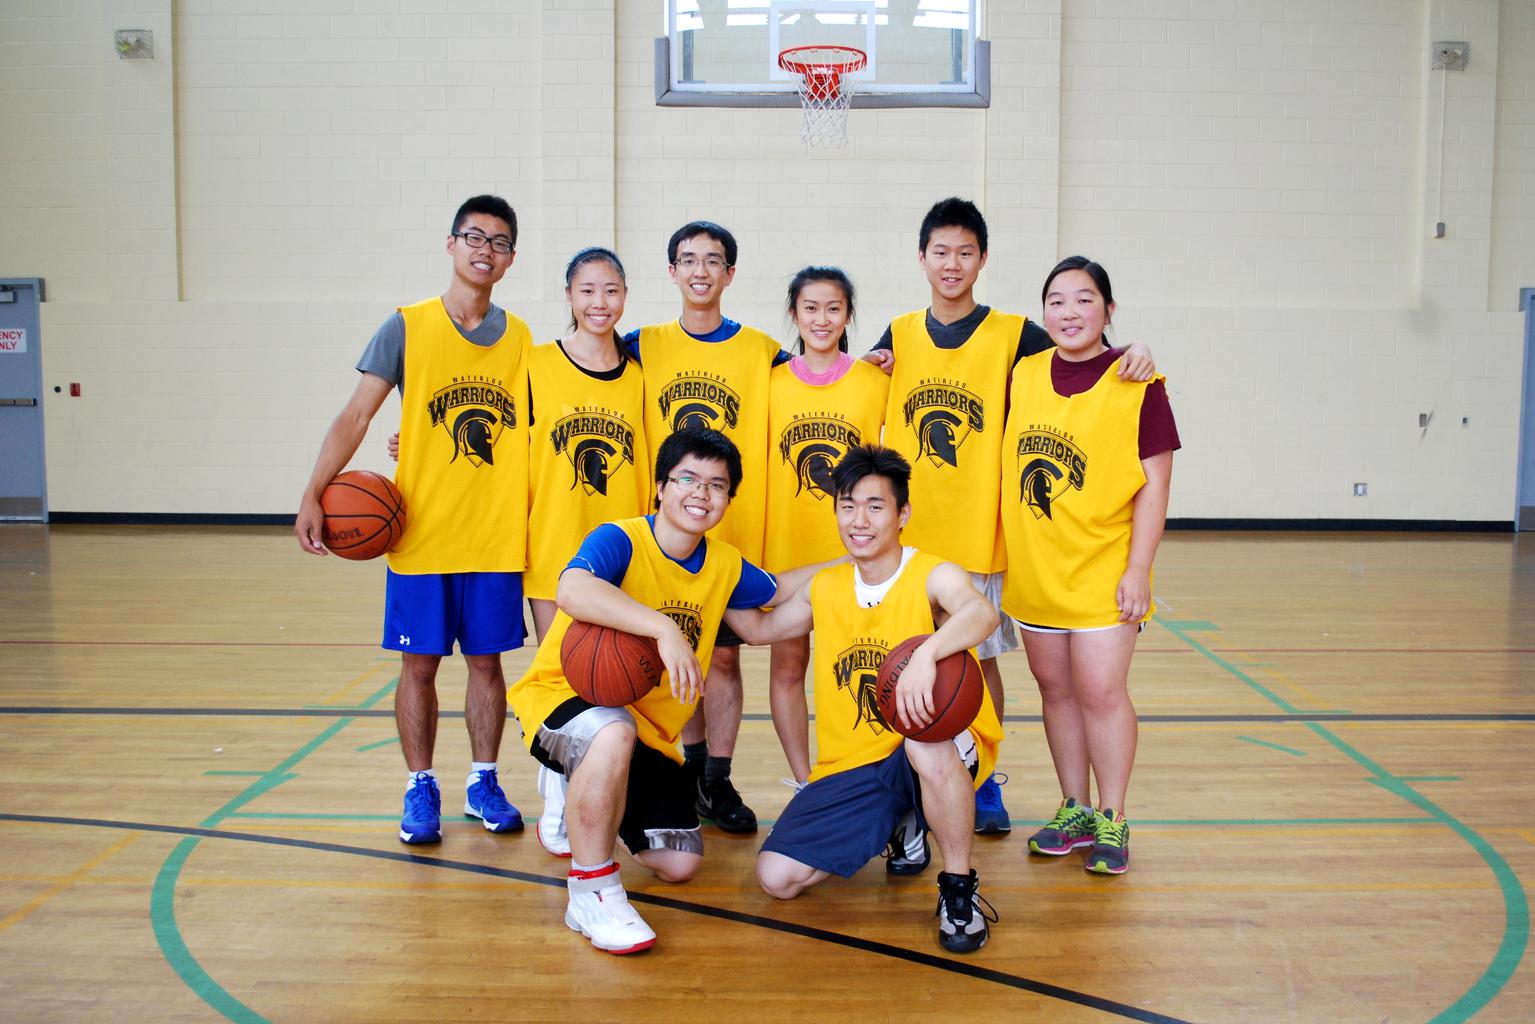 Intramural basketball team picture